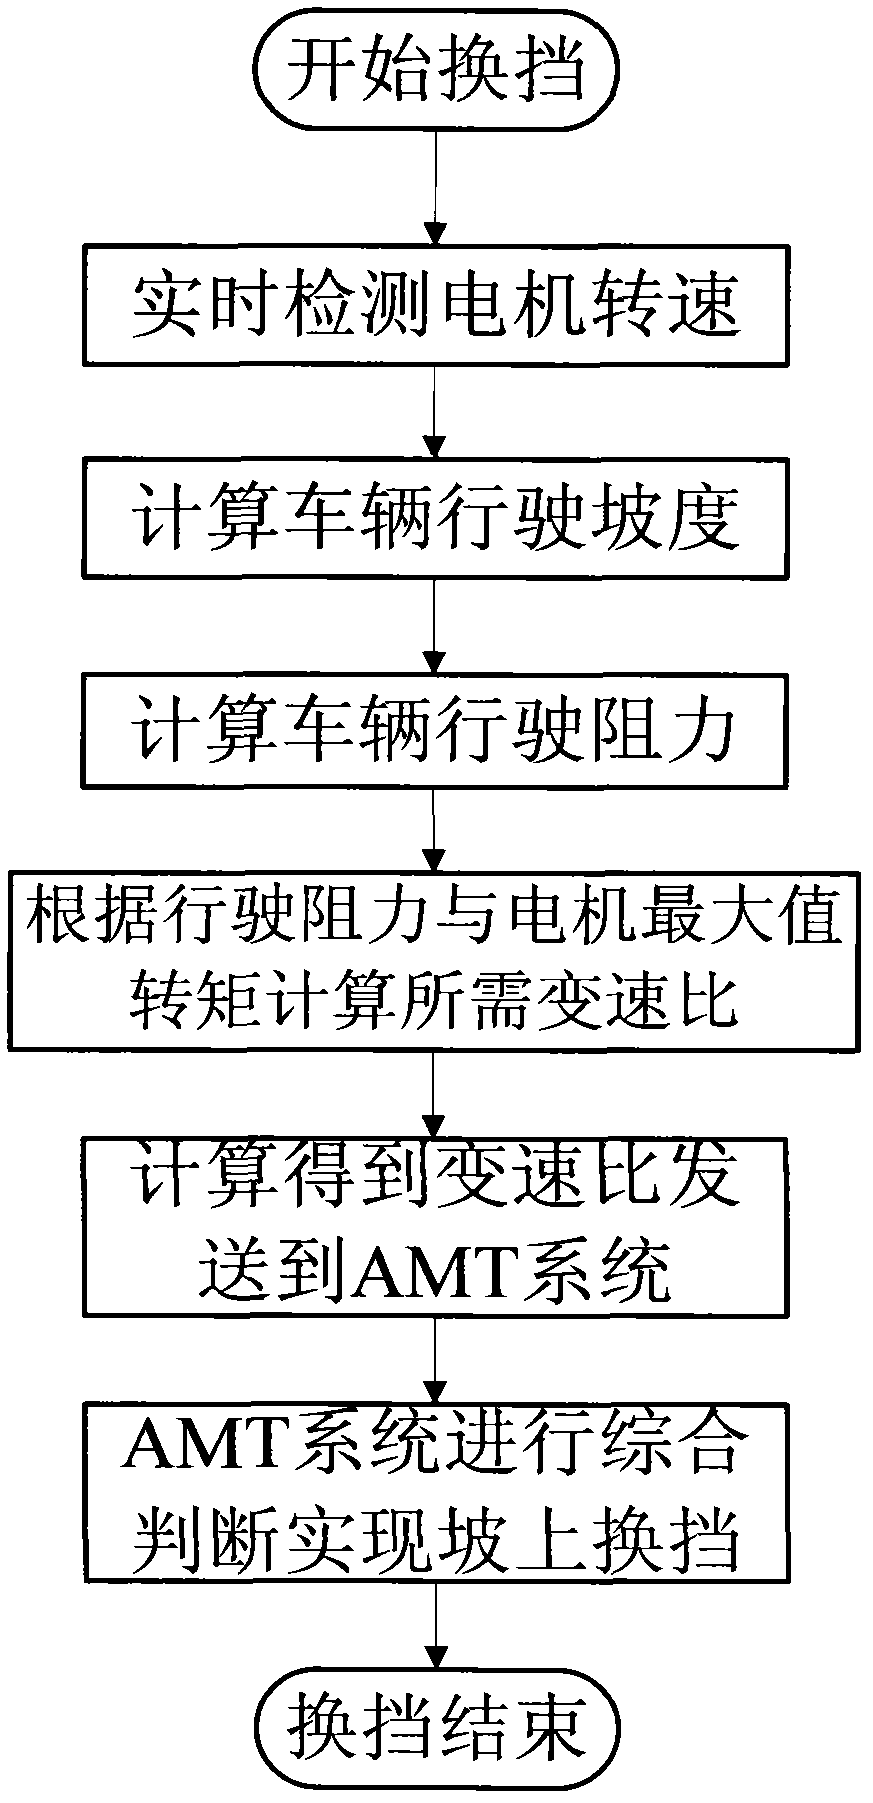 Combinational control method of gear shift by automatic mechanical transmission (ATM ) system of electric automobile running on upslope